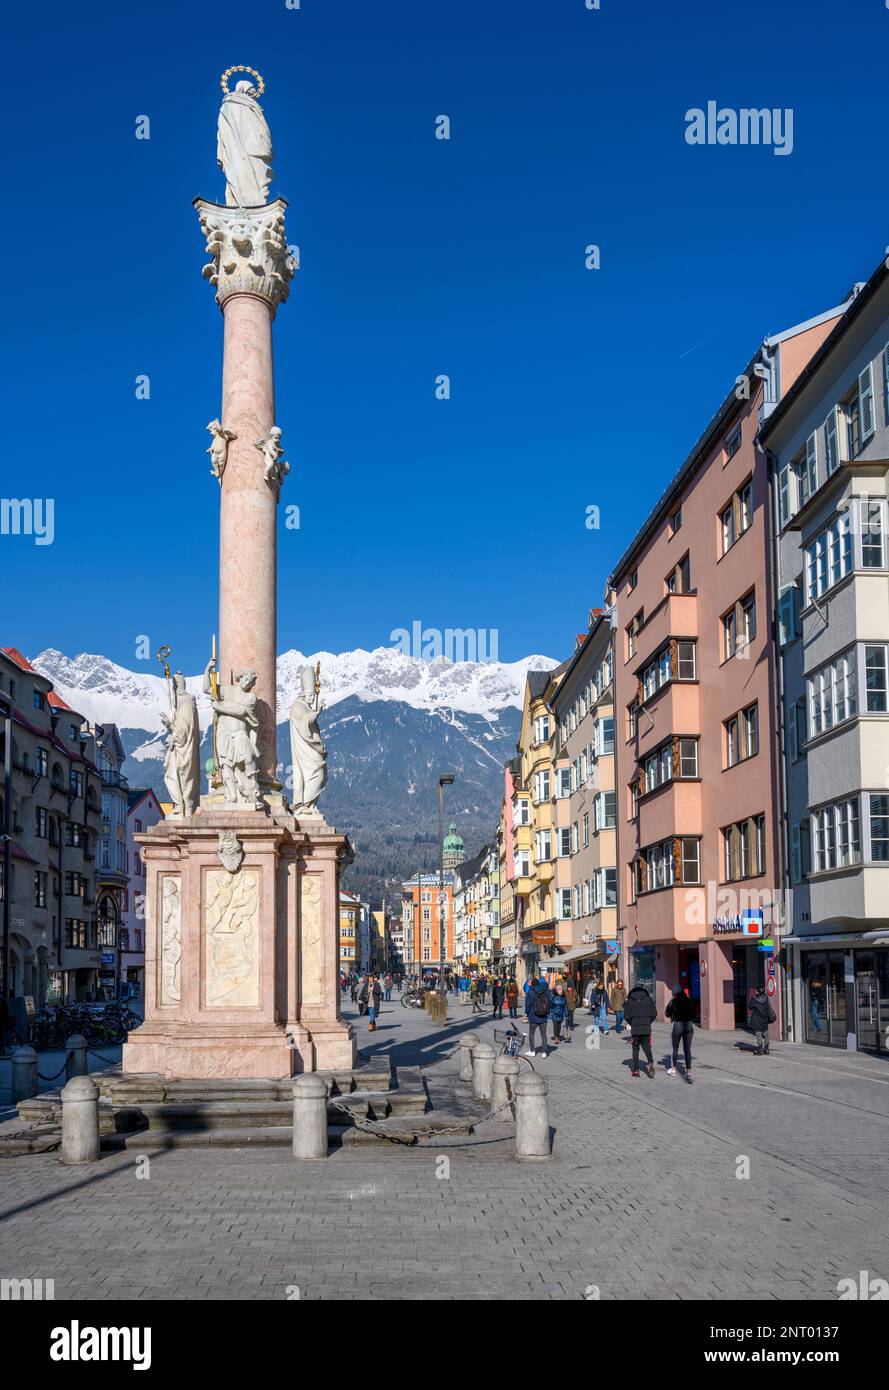 Statue of the Virgin Mary on Maria-Theresien Strasse in the centre of Innsbruck, Austria Stock Photo